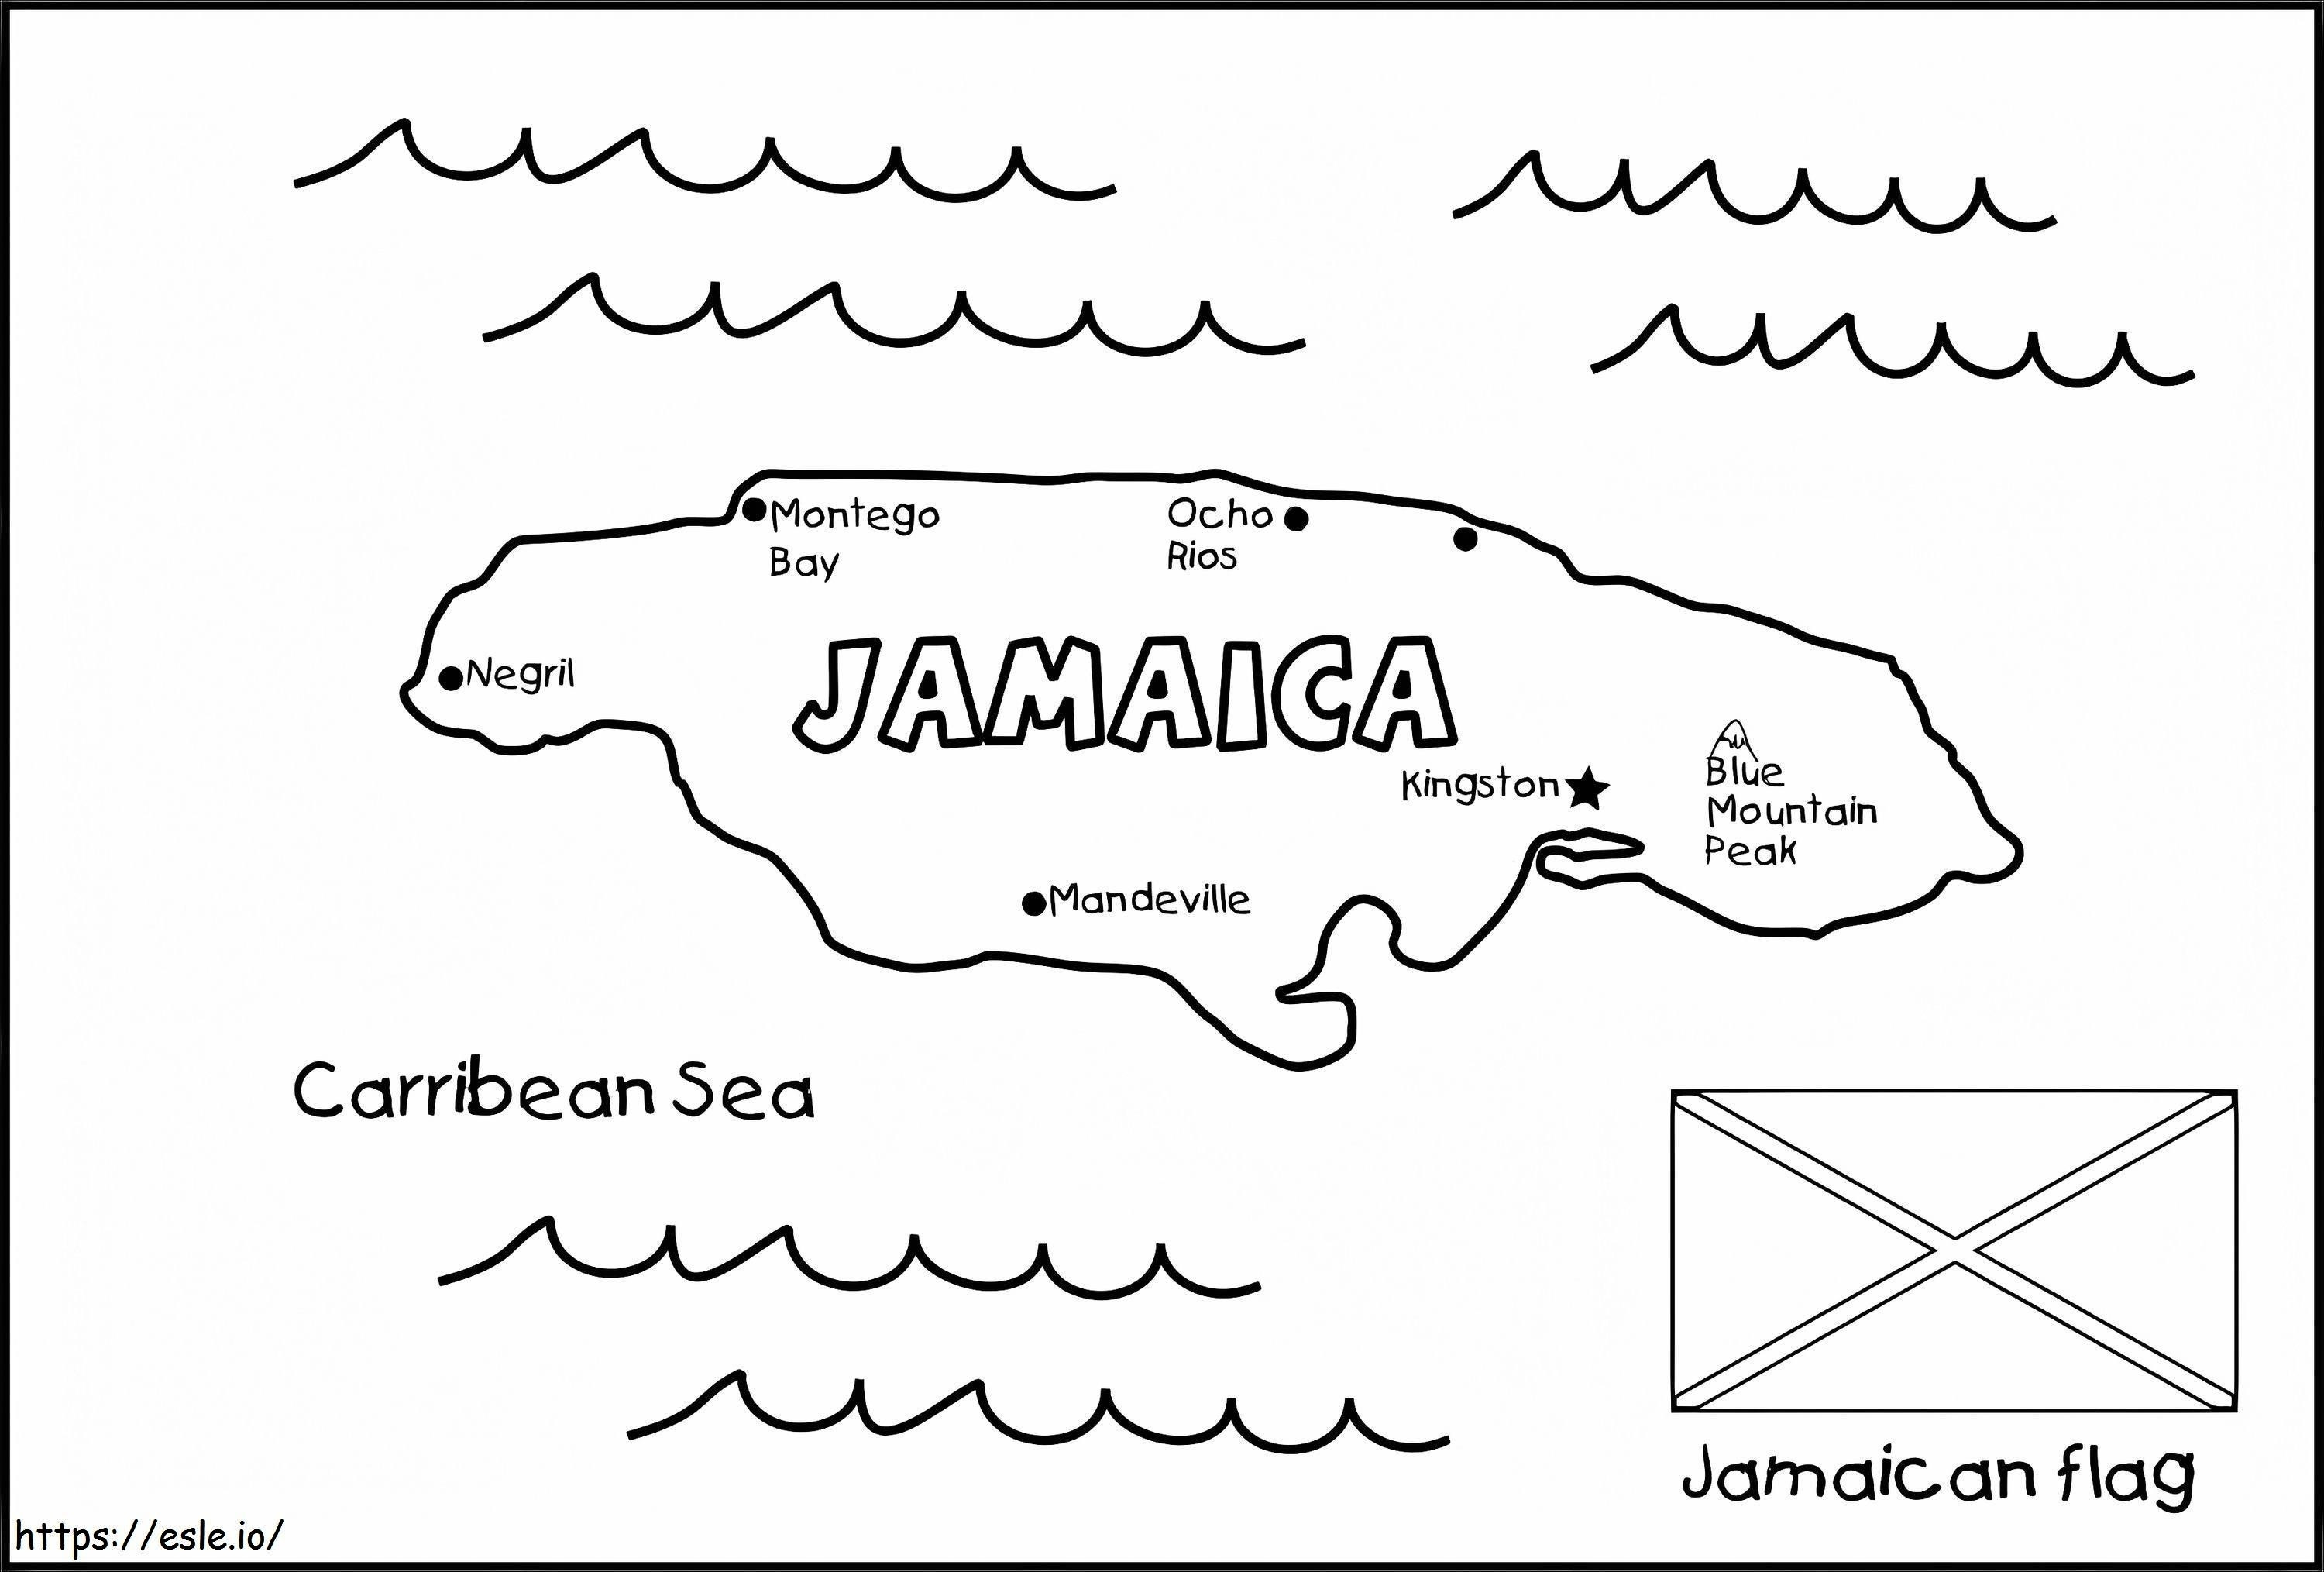 Jamaica Map And Flag coloring page